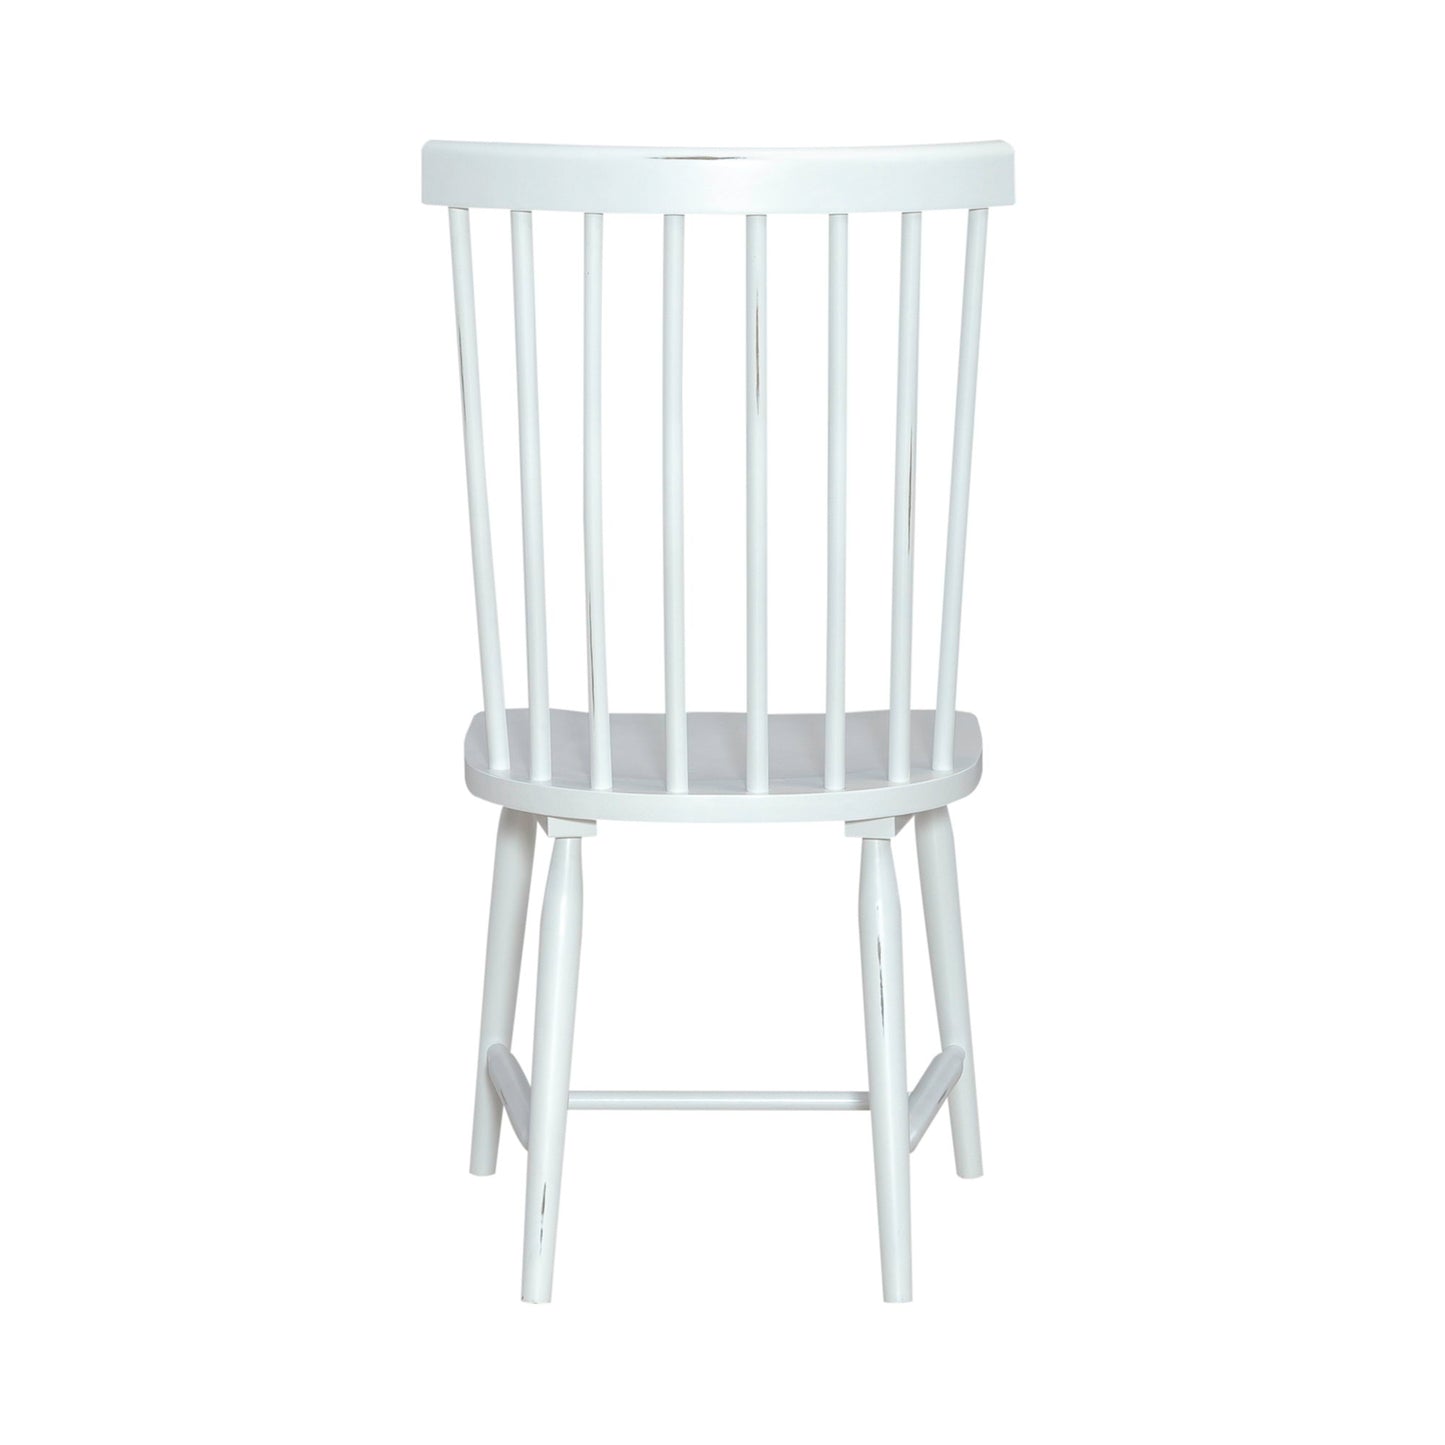 Capeside Cottage - Spindle Back Side Chair